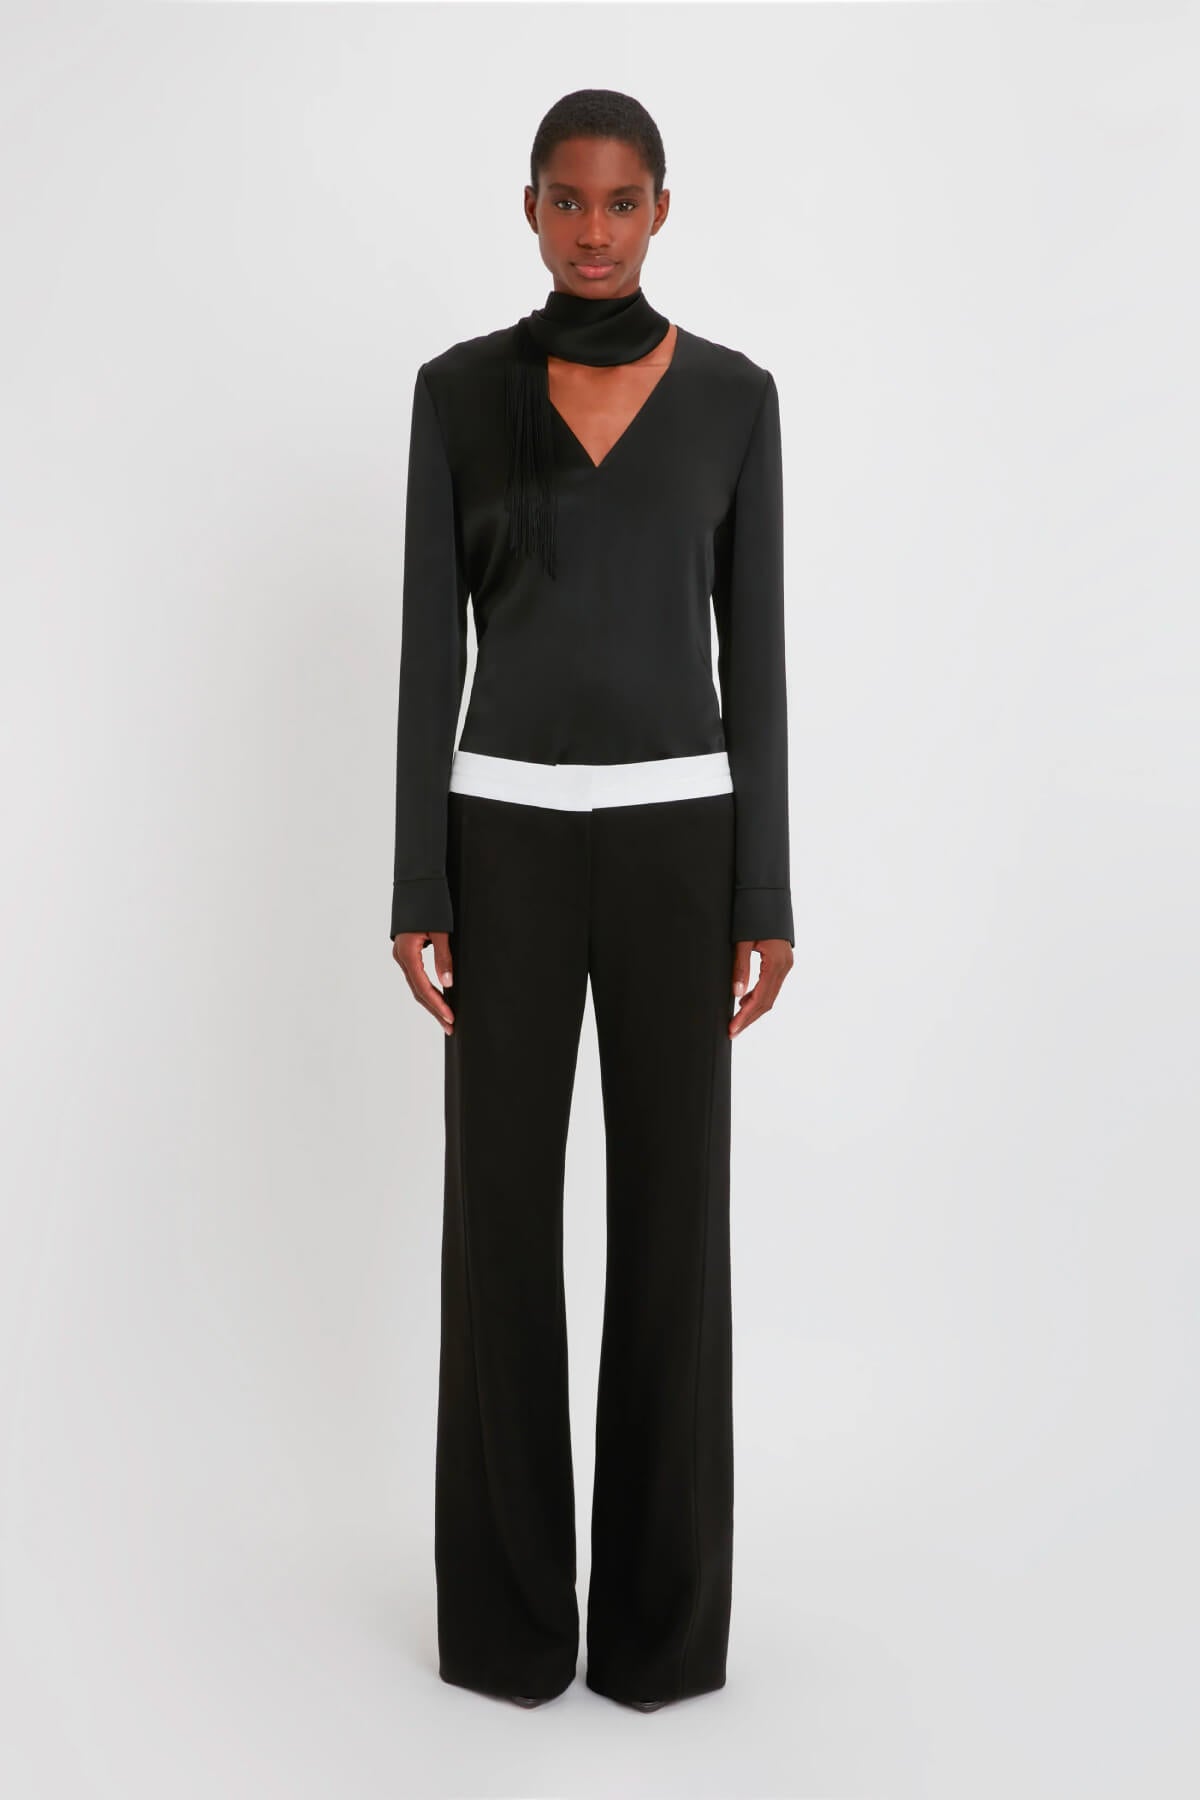 Victoria Beckham Textured Wool Side Panel Trousers - Black